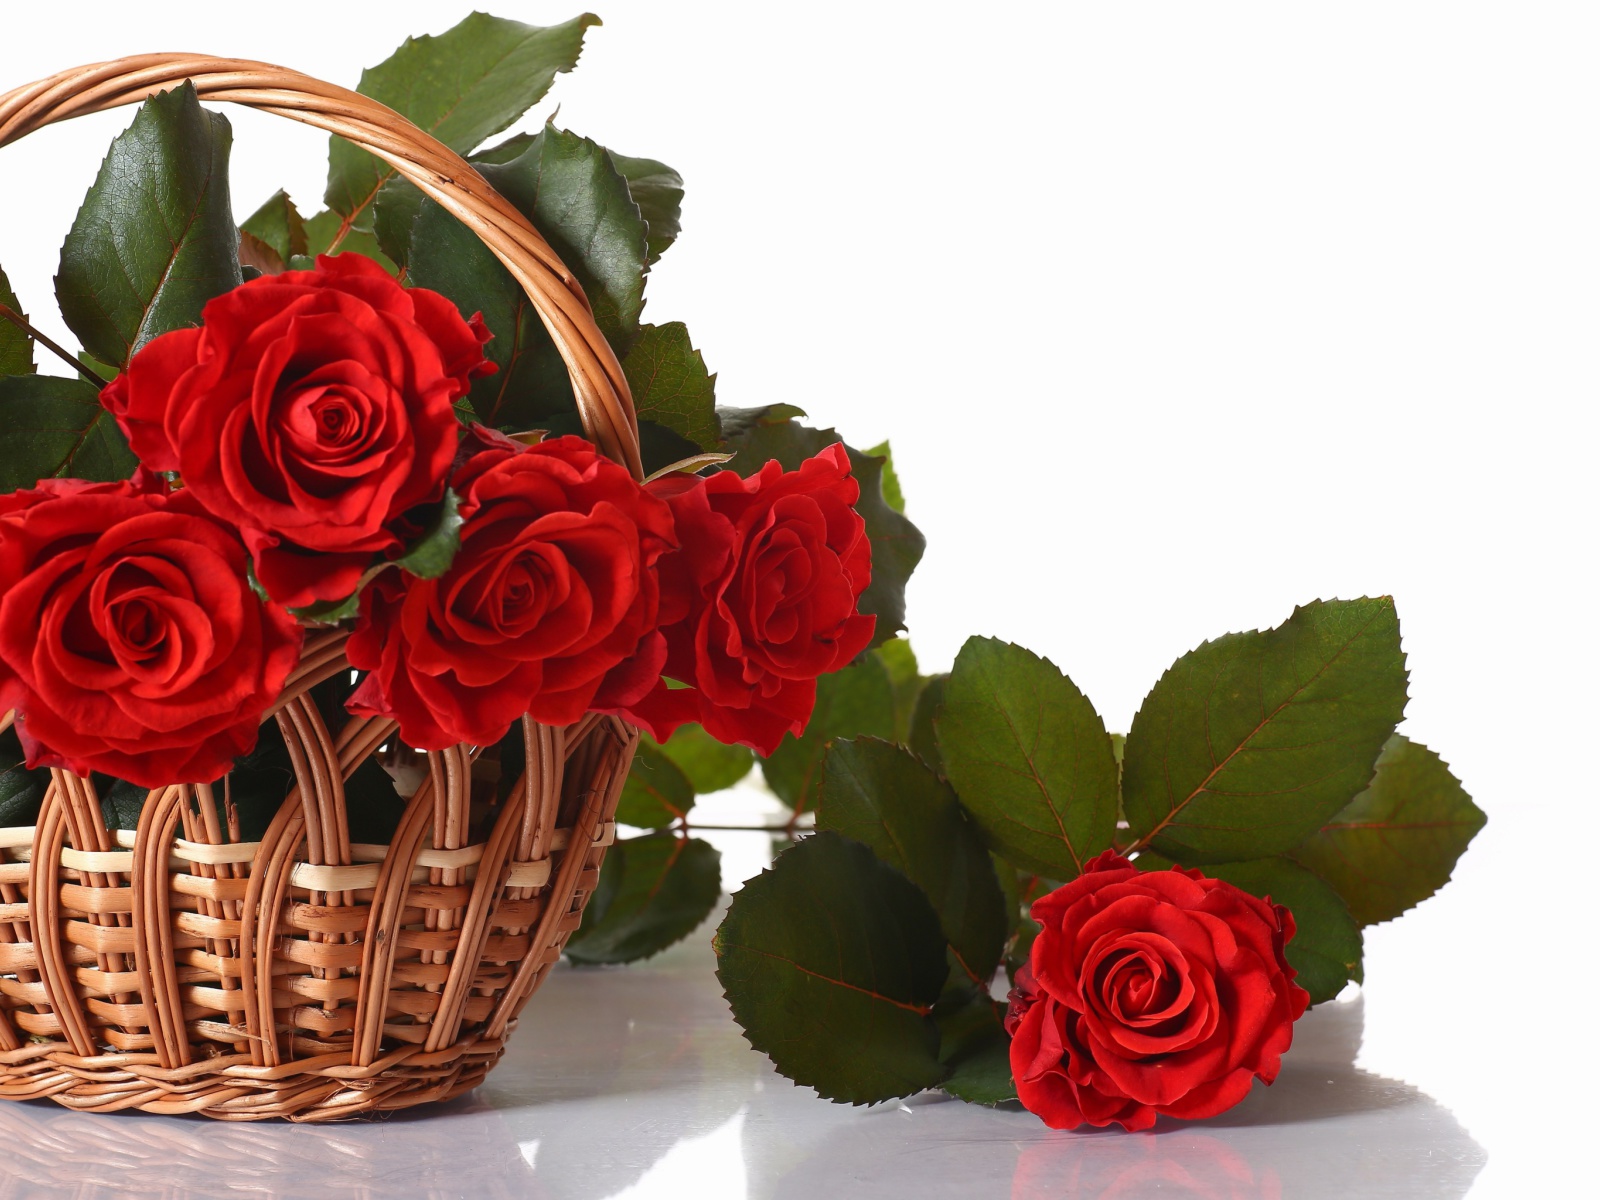 Basket with Roses wallpaper 1600x1200